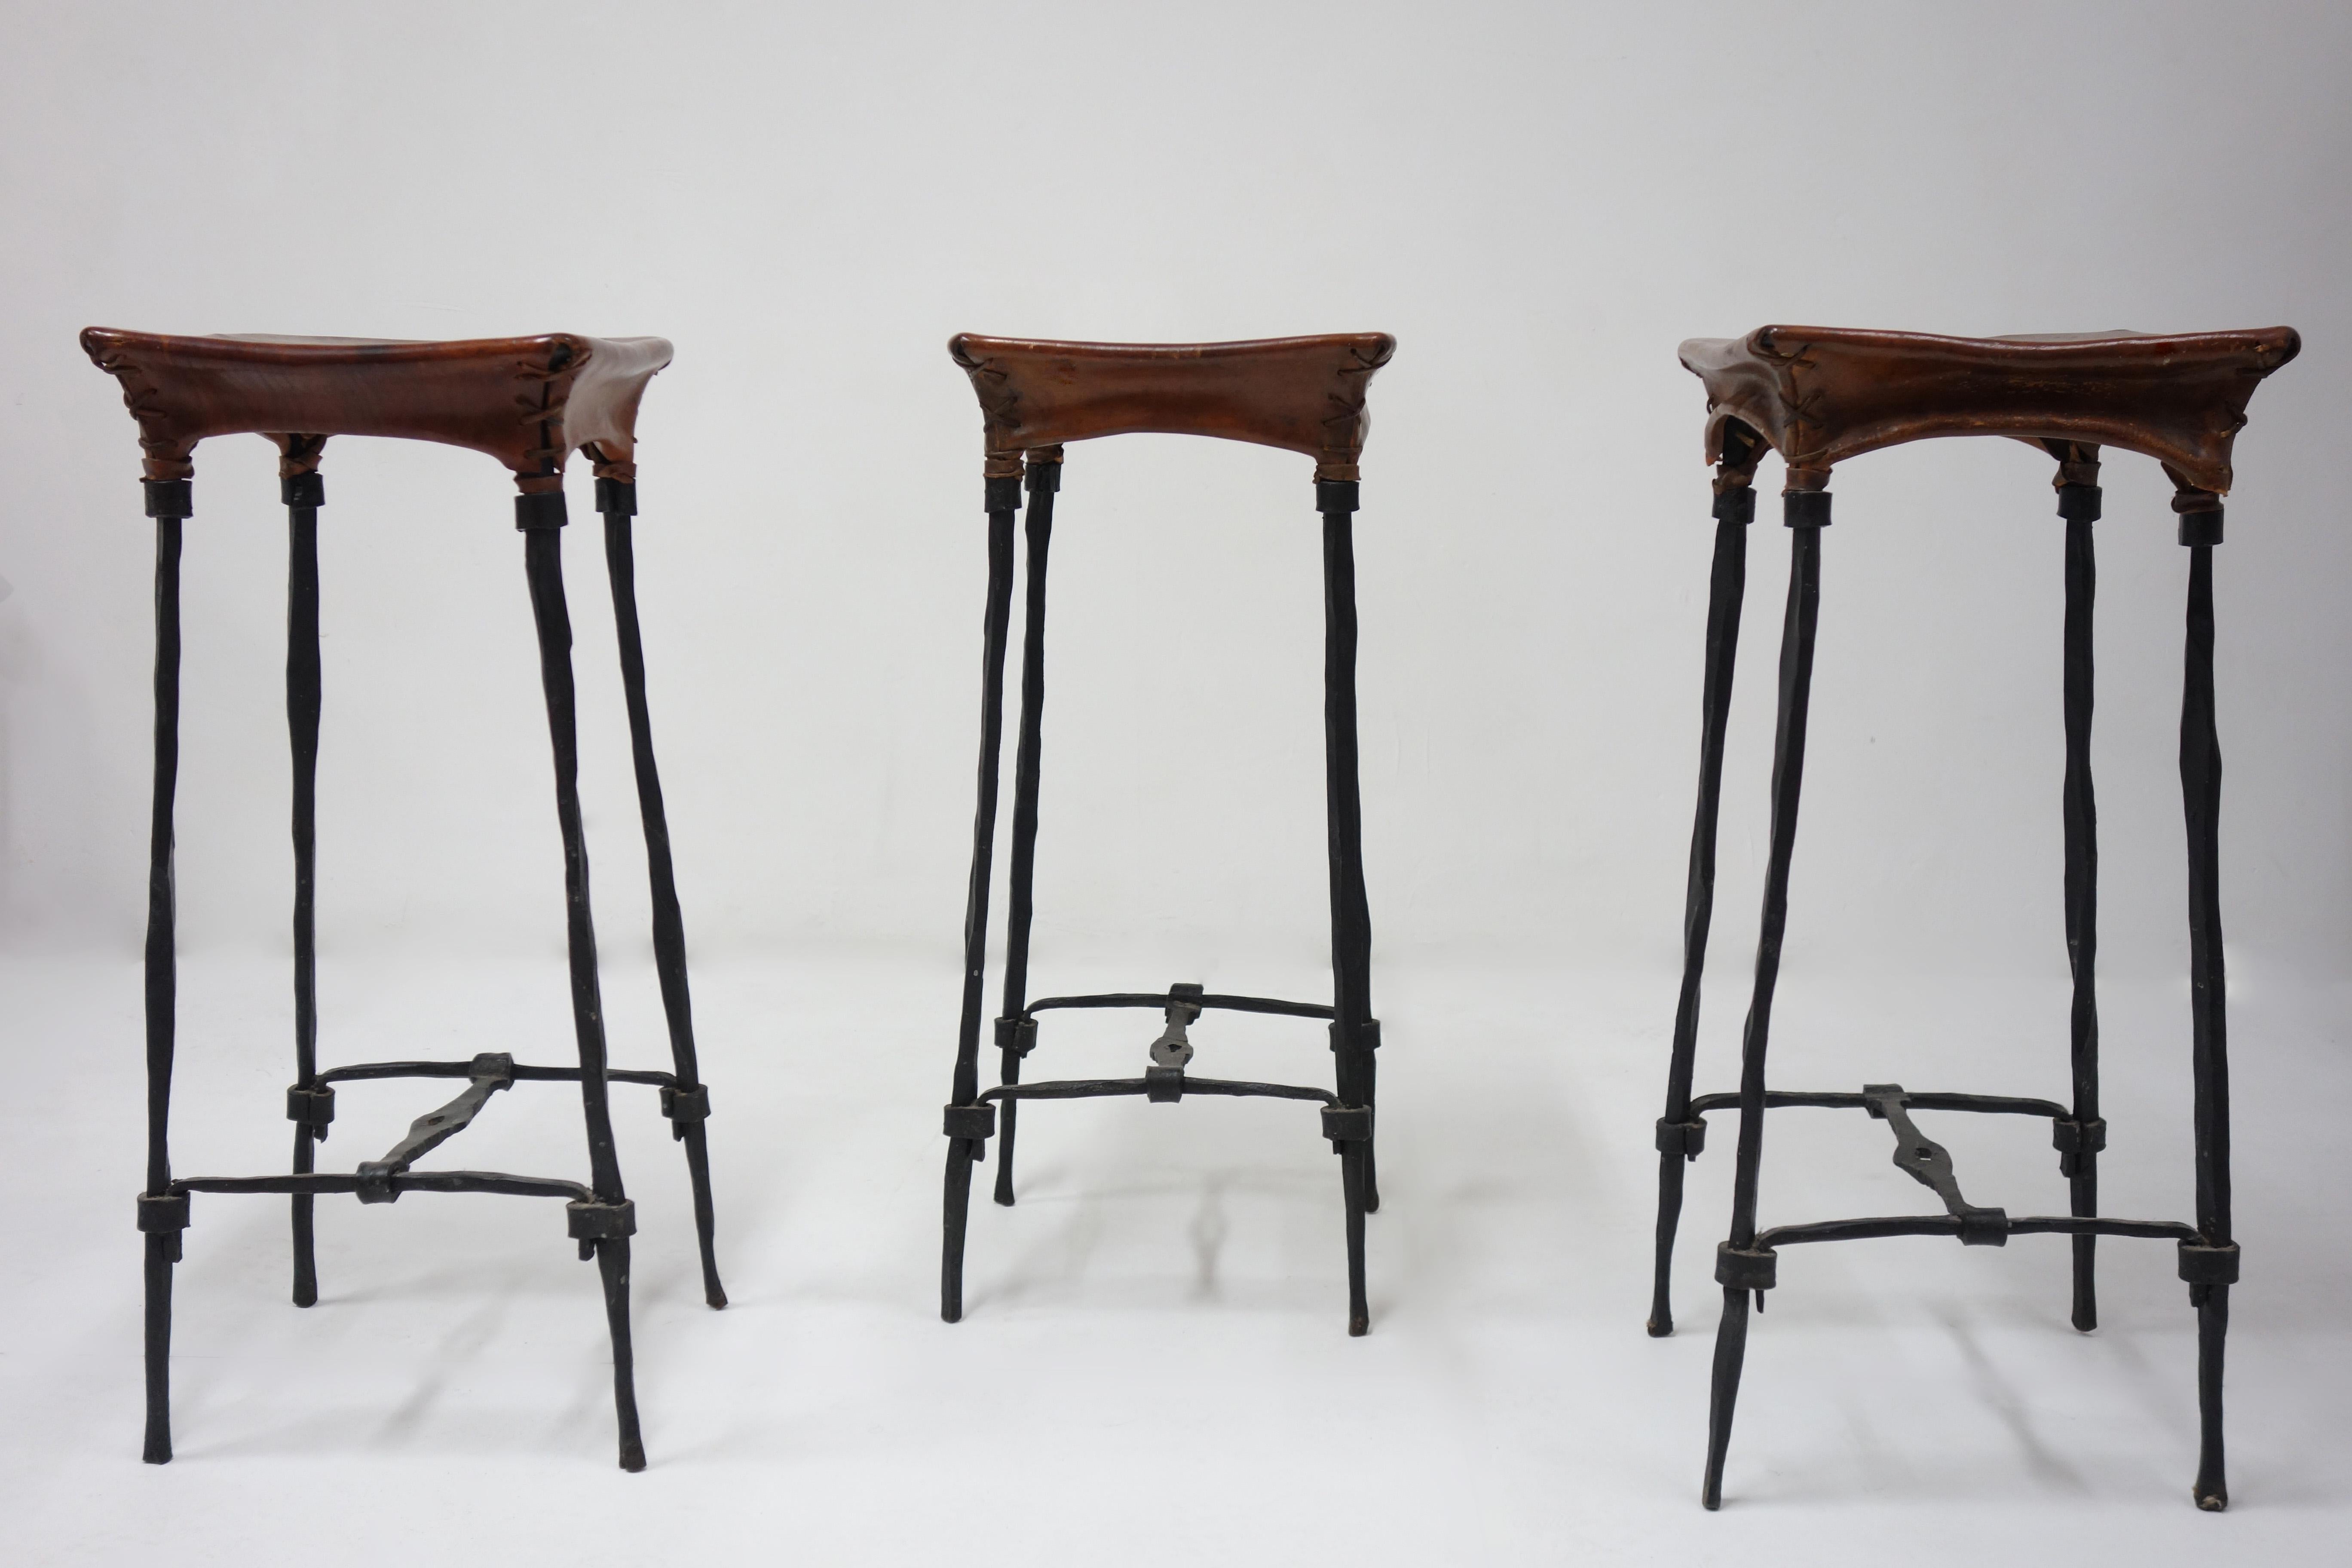 Set of 3 bar stool by François & Sido Thevenin with a black wrought iron structure and avbrown patina leather. François and Sido Thevenin give life to metal thanks to their great mastery of forging. This model is rare in this bar stool version. 
 